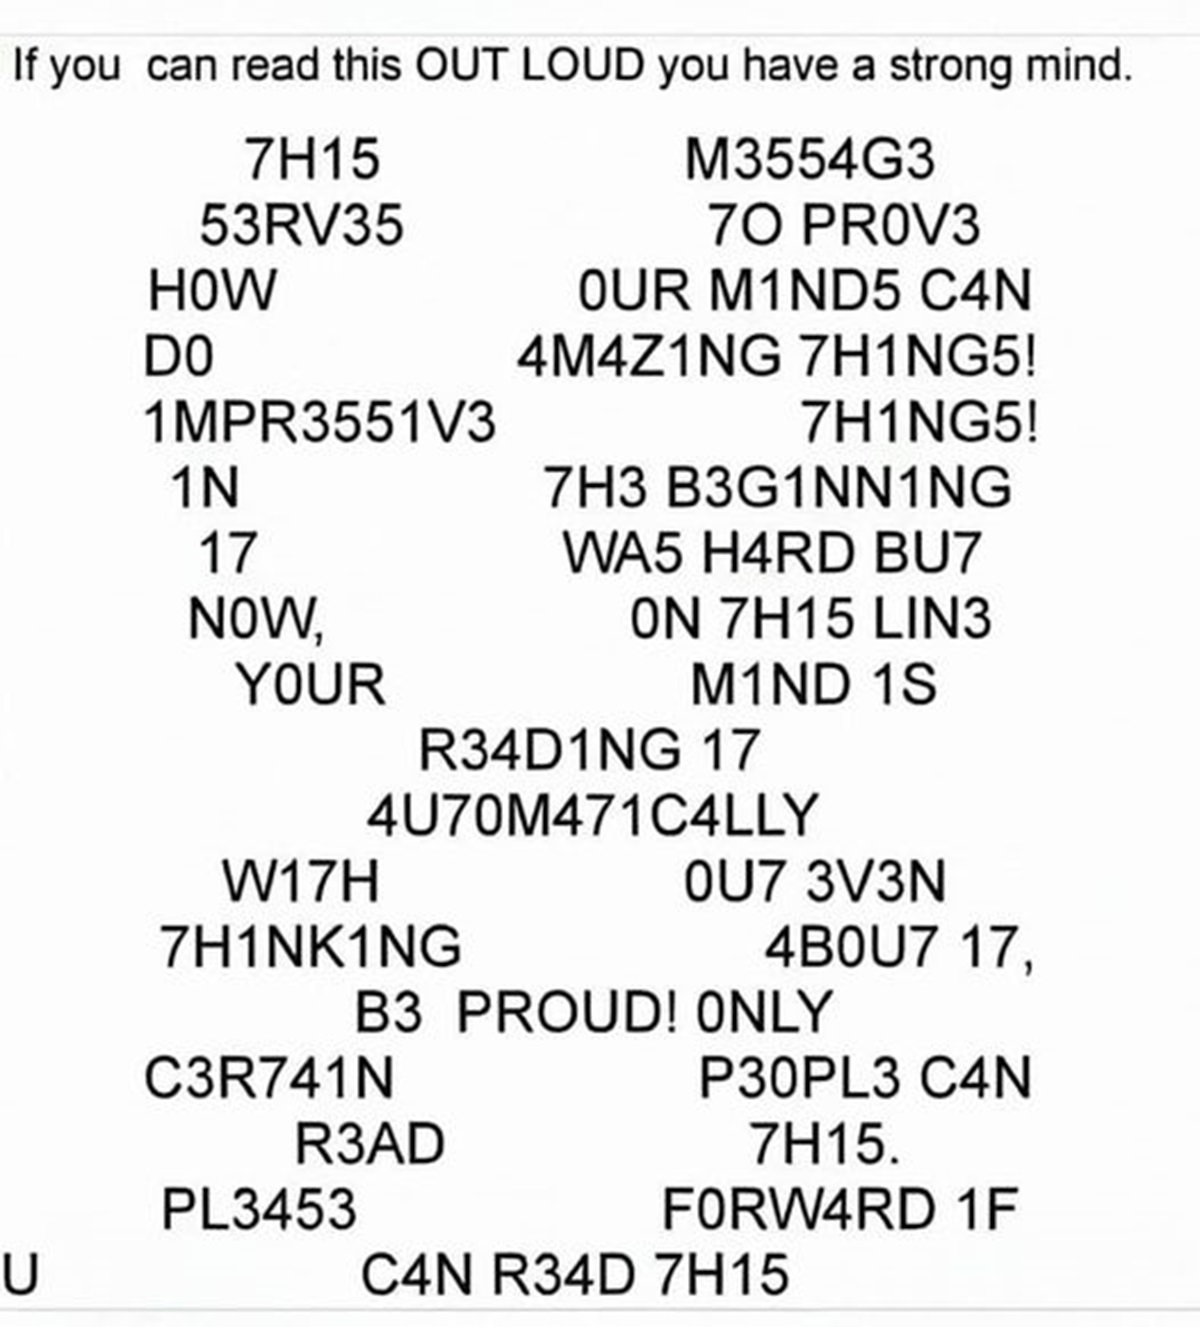 if you can read this out loud you have a strong mind - 7H15 53RV35 If you can read this Out Loud you have a strong mind. M3554G3 70 PROV3 How Our M1ND5 C4N Do 4M4Z1NG 7H1NG5! 1MPR3551V3 7H1NG5! 1N 7H3 B3G1NN1NG 17 WA5 H4RD BU7 Now, On 7H15 LIN3 Your M1ND 